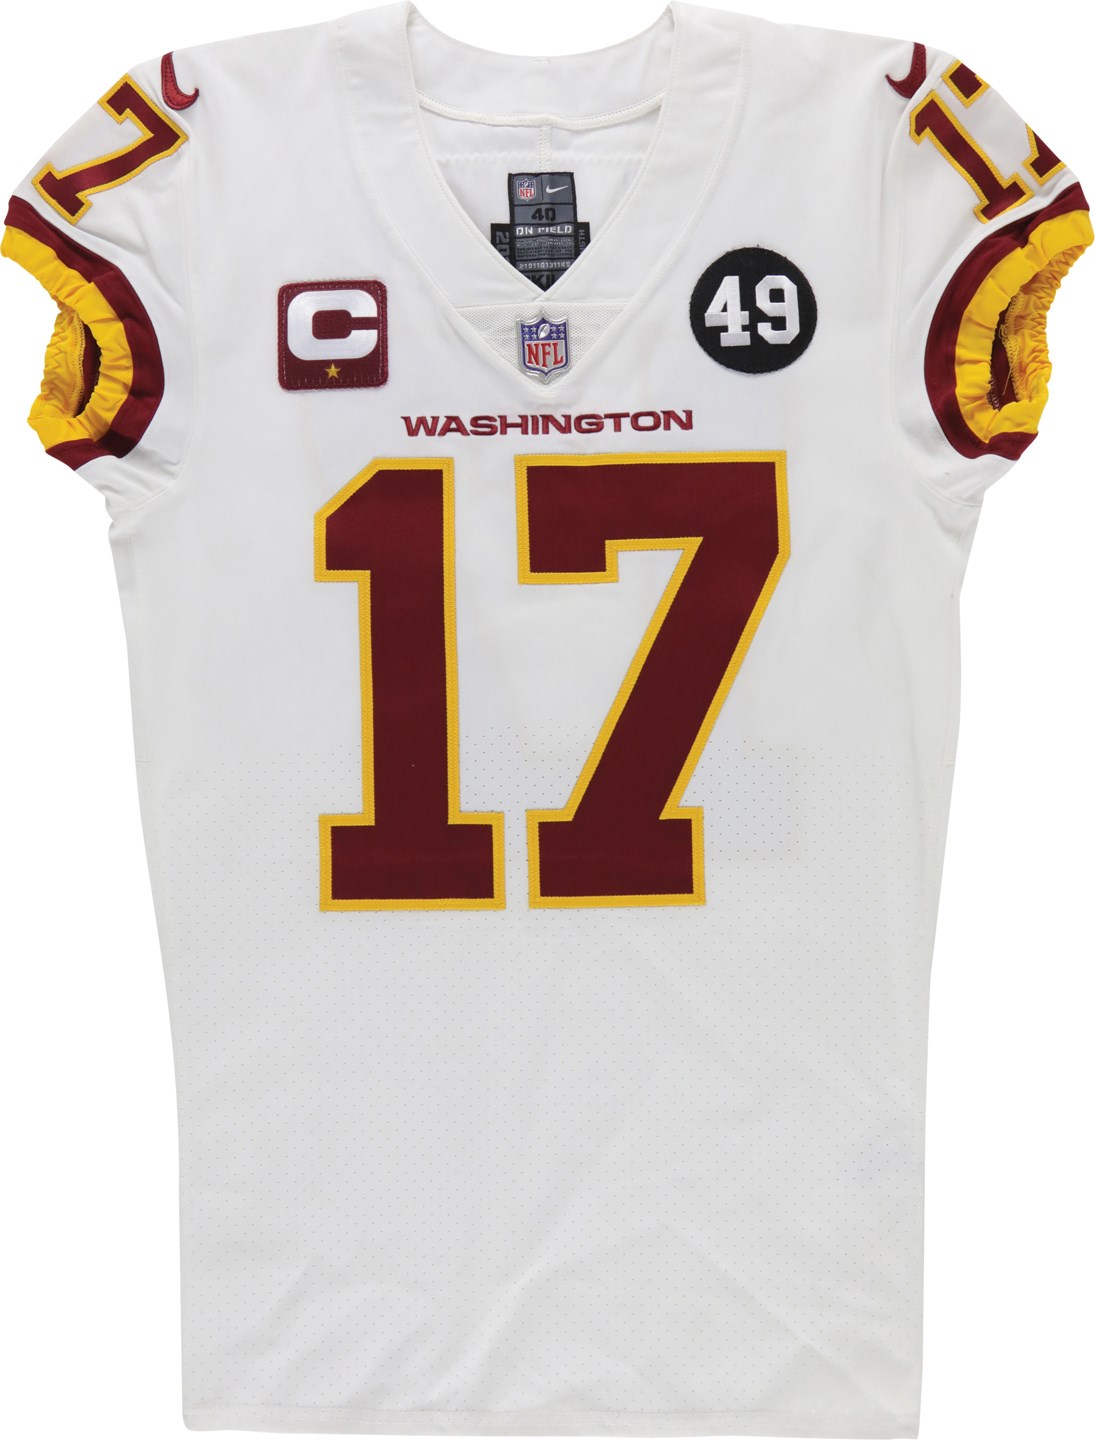 Football - 2020 Terry McLaurin Washington Football Team Game Jersey Signed & Inscribed to Adrian Peterson (PSA)